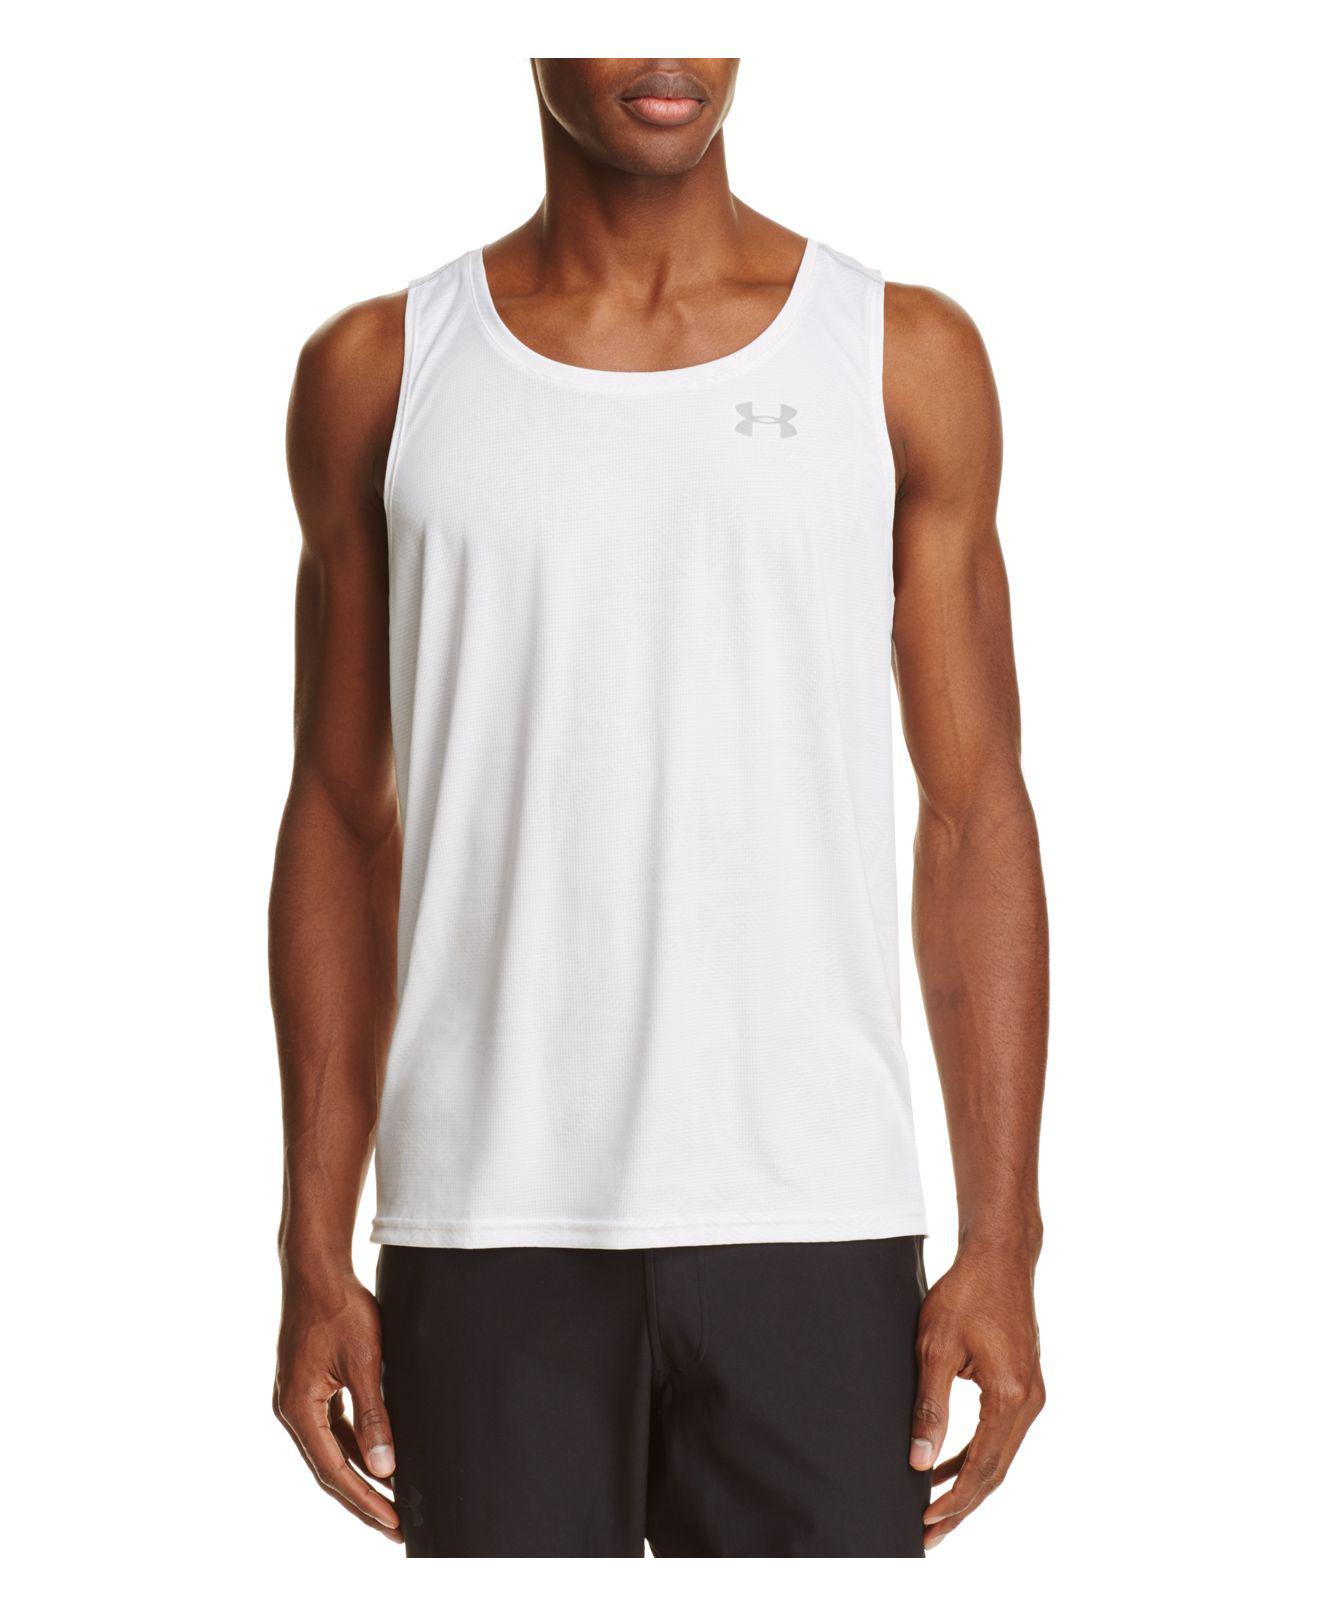 Lyst - Under Armour Coolswitch Running Singlet Tank Top in White for Men